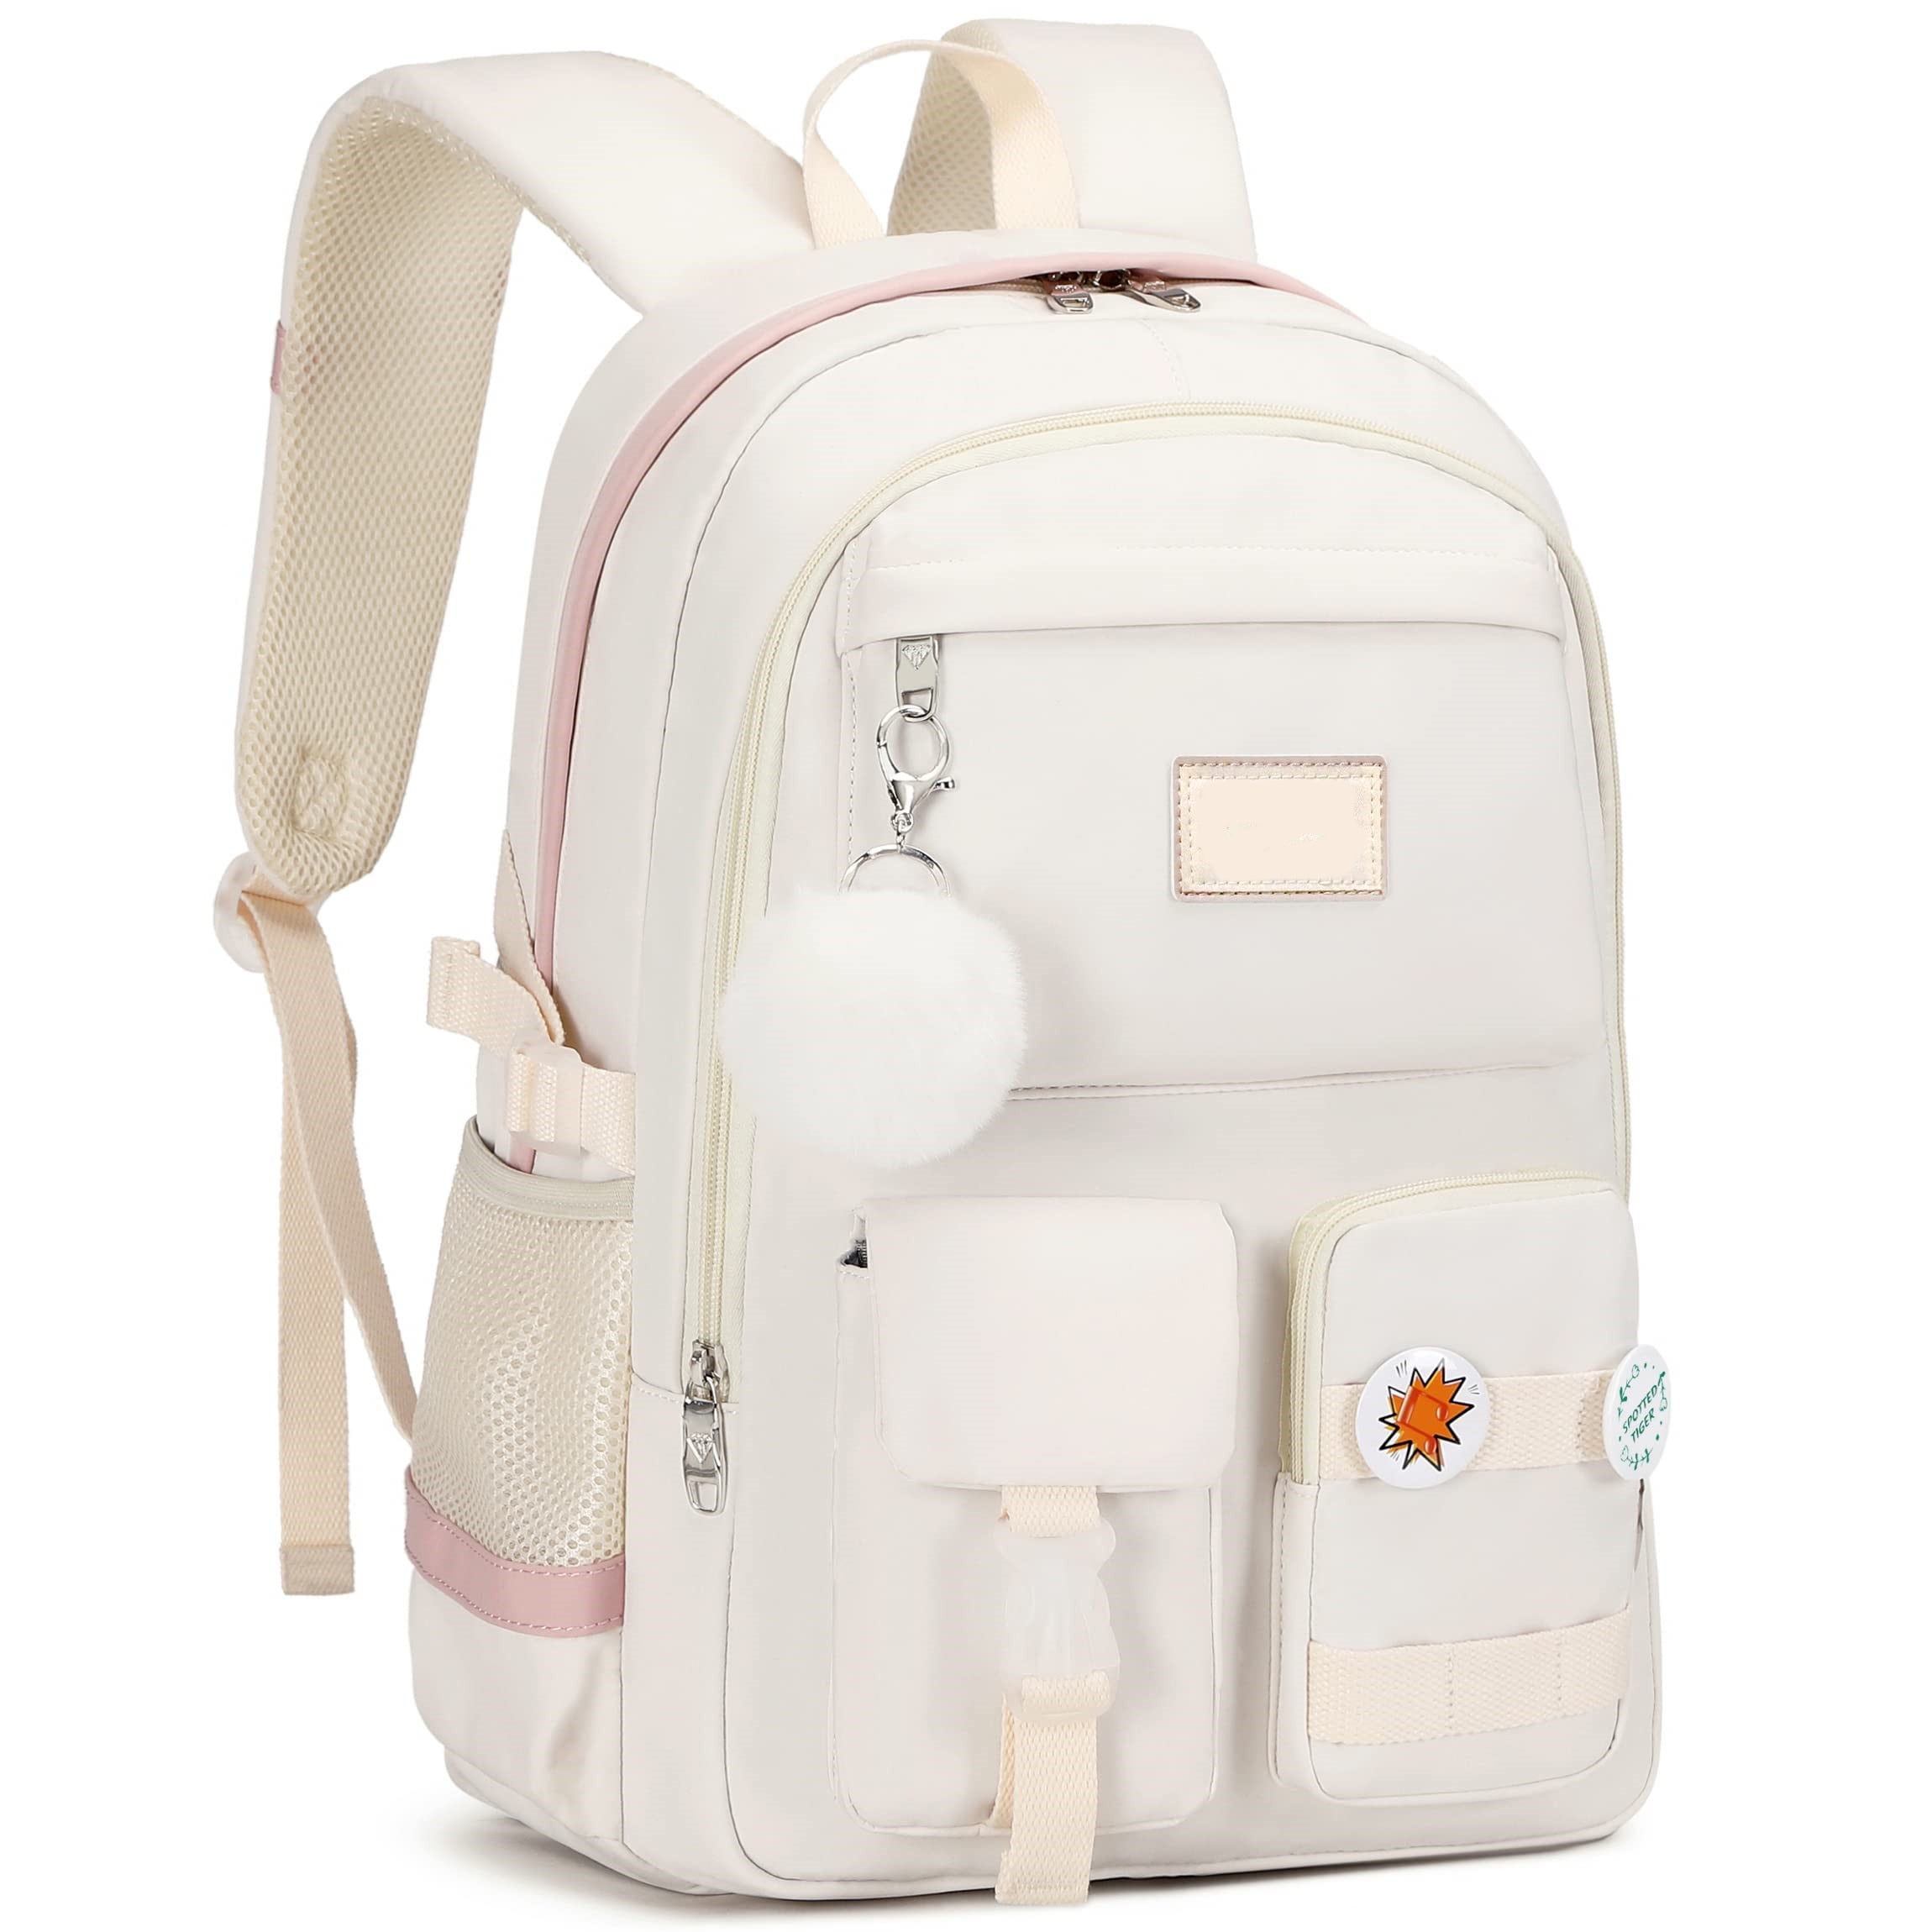 Spotted Tiger School Backpack for Girls Bookbag School Bag Aesthetic Backpack for Teen Girls Women, by Pakasept, Kids Unisex, Size: As Shown, White